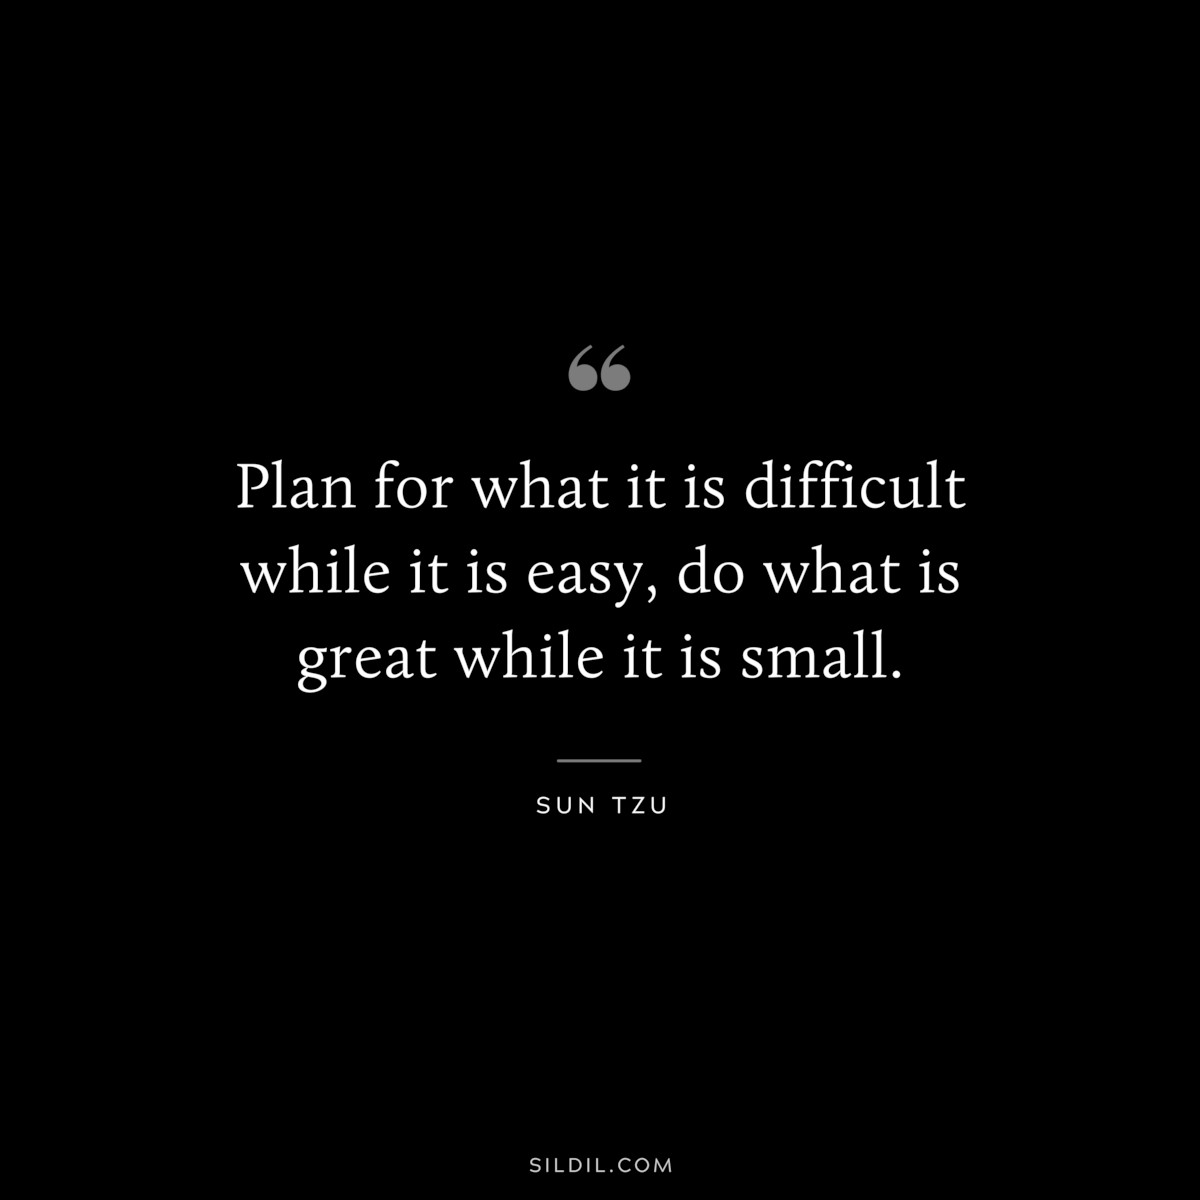 Plan for what it is difficult while it is easy, do what is great while it is small.― Sun Tzu